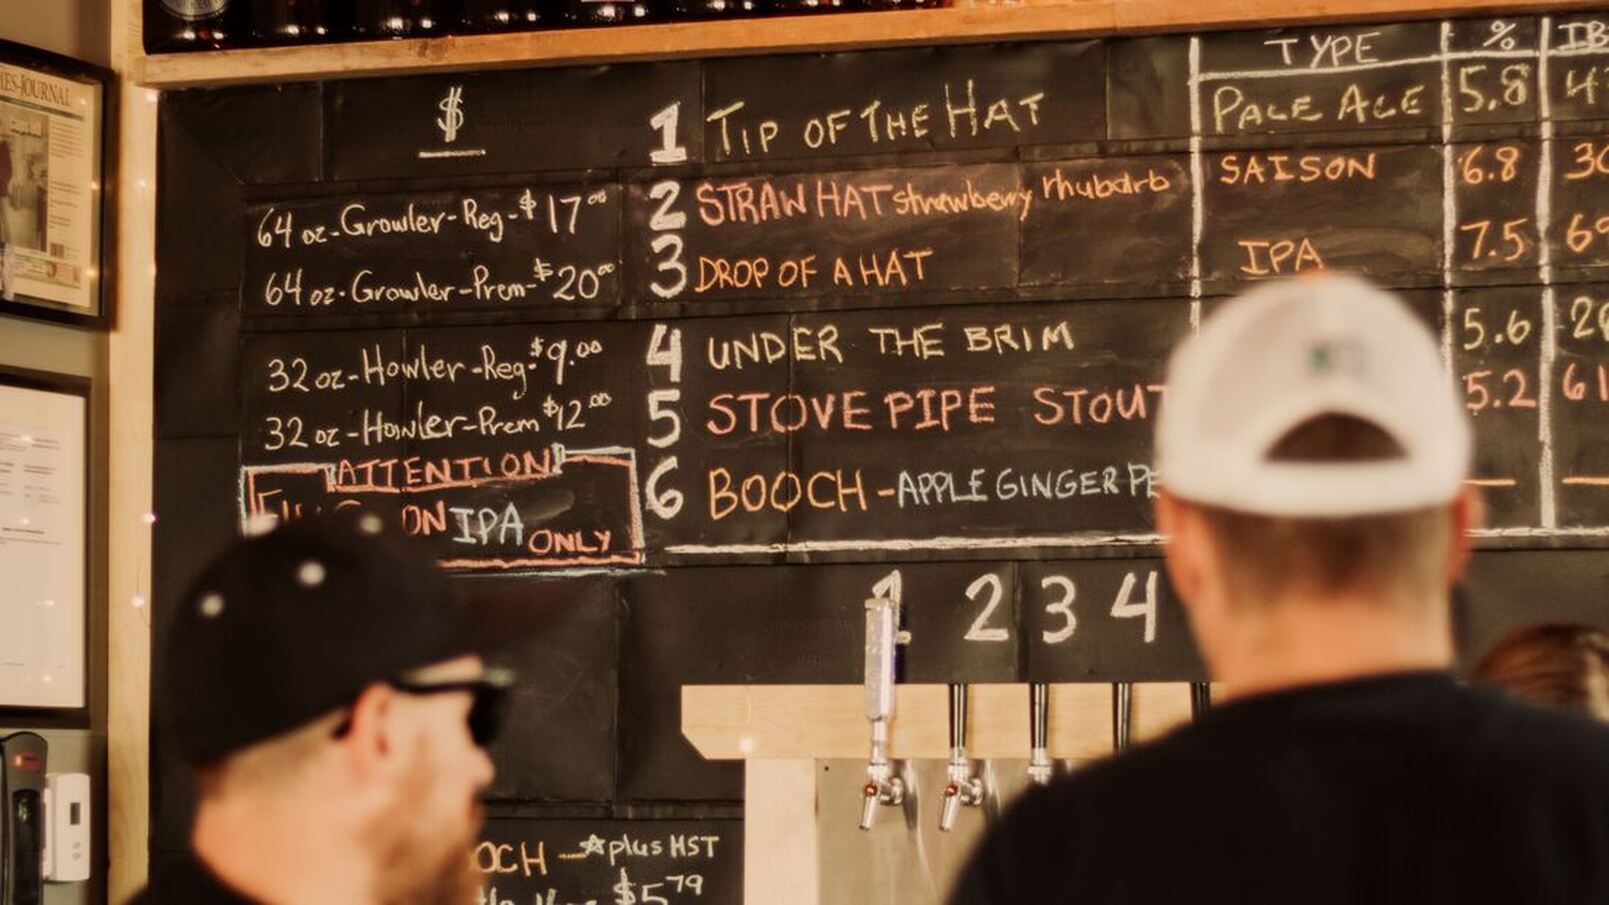 Here is a photo of the menu board at Caps Off Brewing. On the left it lists the prices for the larger amounts of their Growler and Howler beers. In the middle are their six flavours listed. From top to bottom they are Tip of the Hat, Straw Hat Strawberry Rhubard, Drop of Hat, Under the Brim, Stove Pipe Stout, and Booch Apple Ginger. In front of the menu are two men standing. In between the men you can see the taps for the six beers listed.